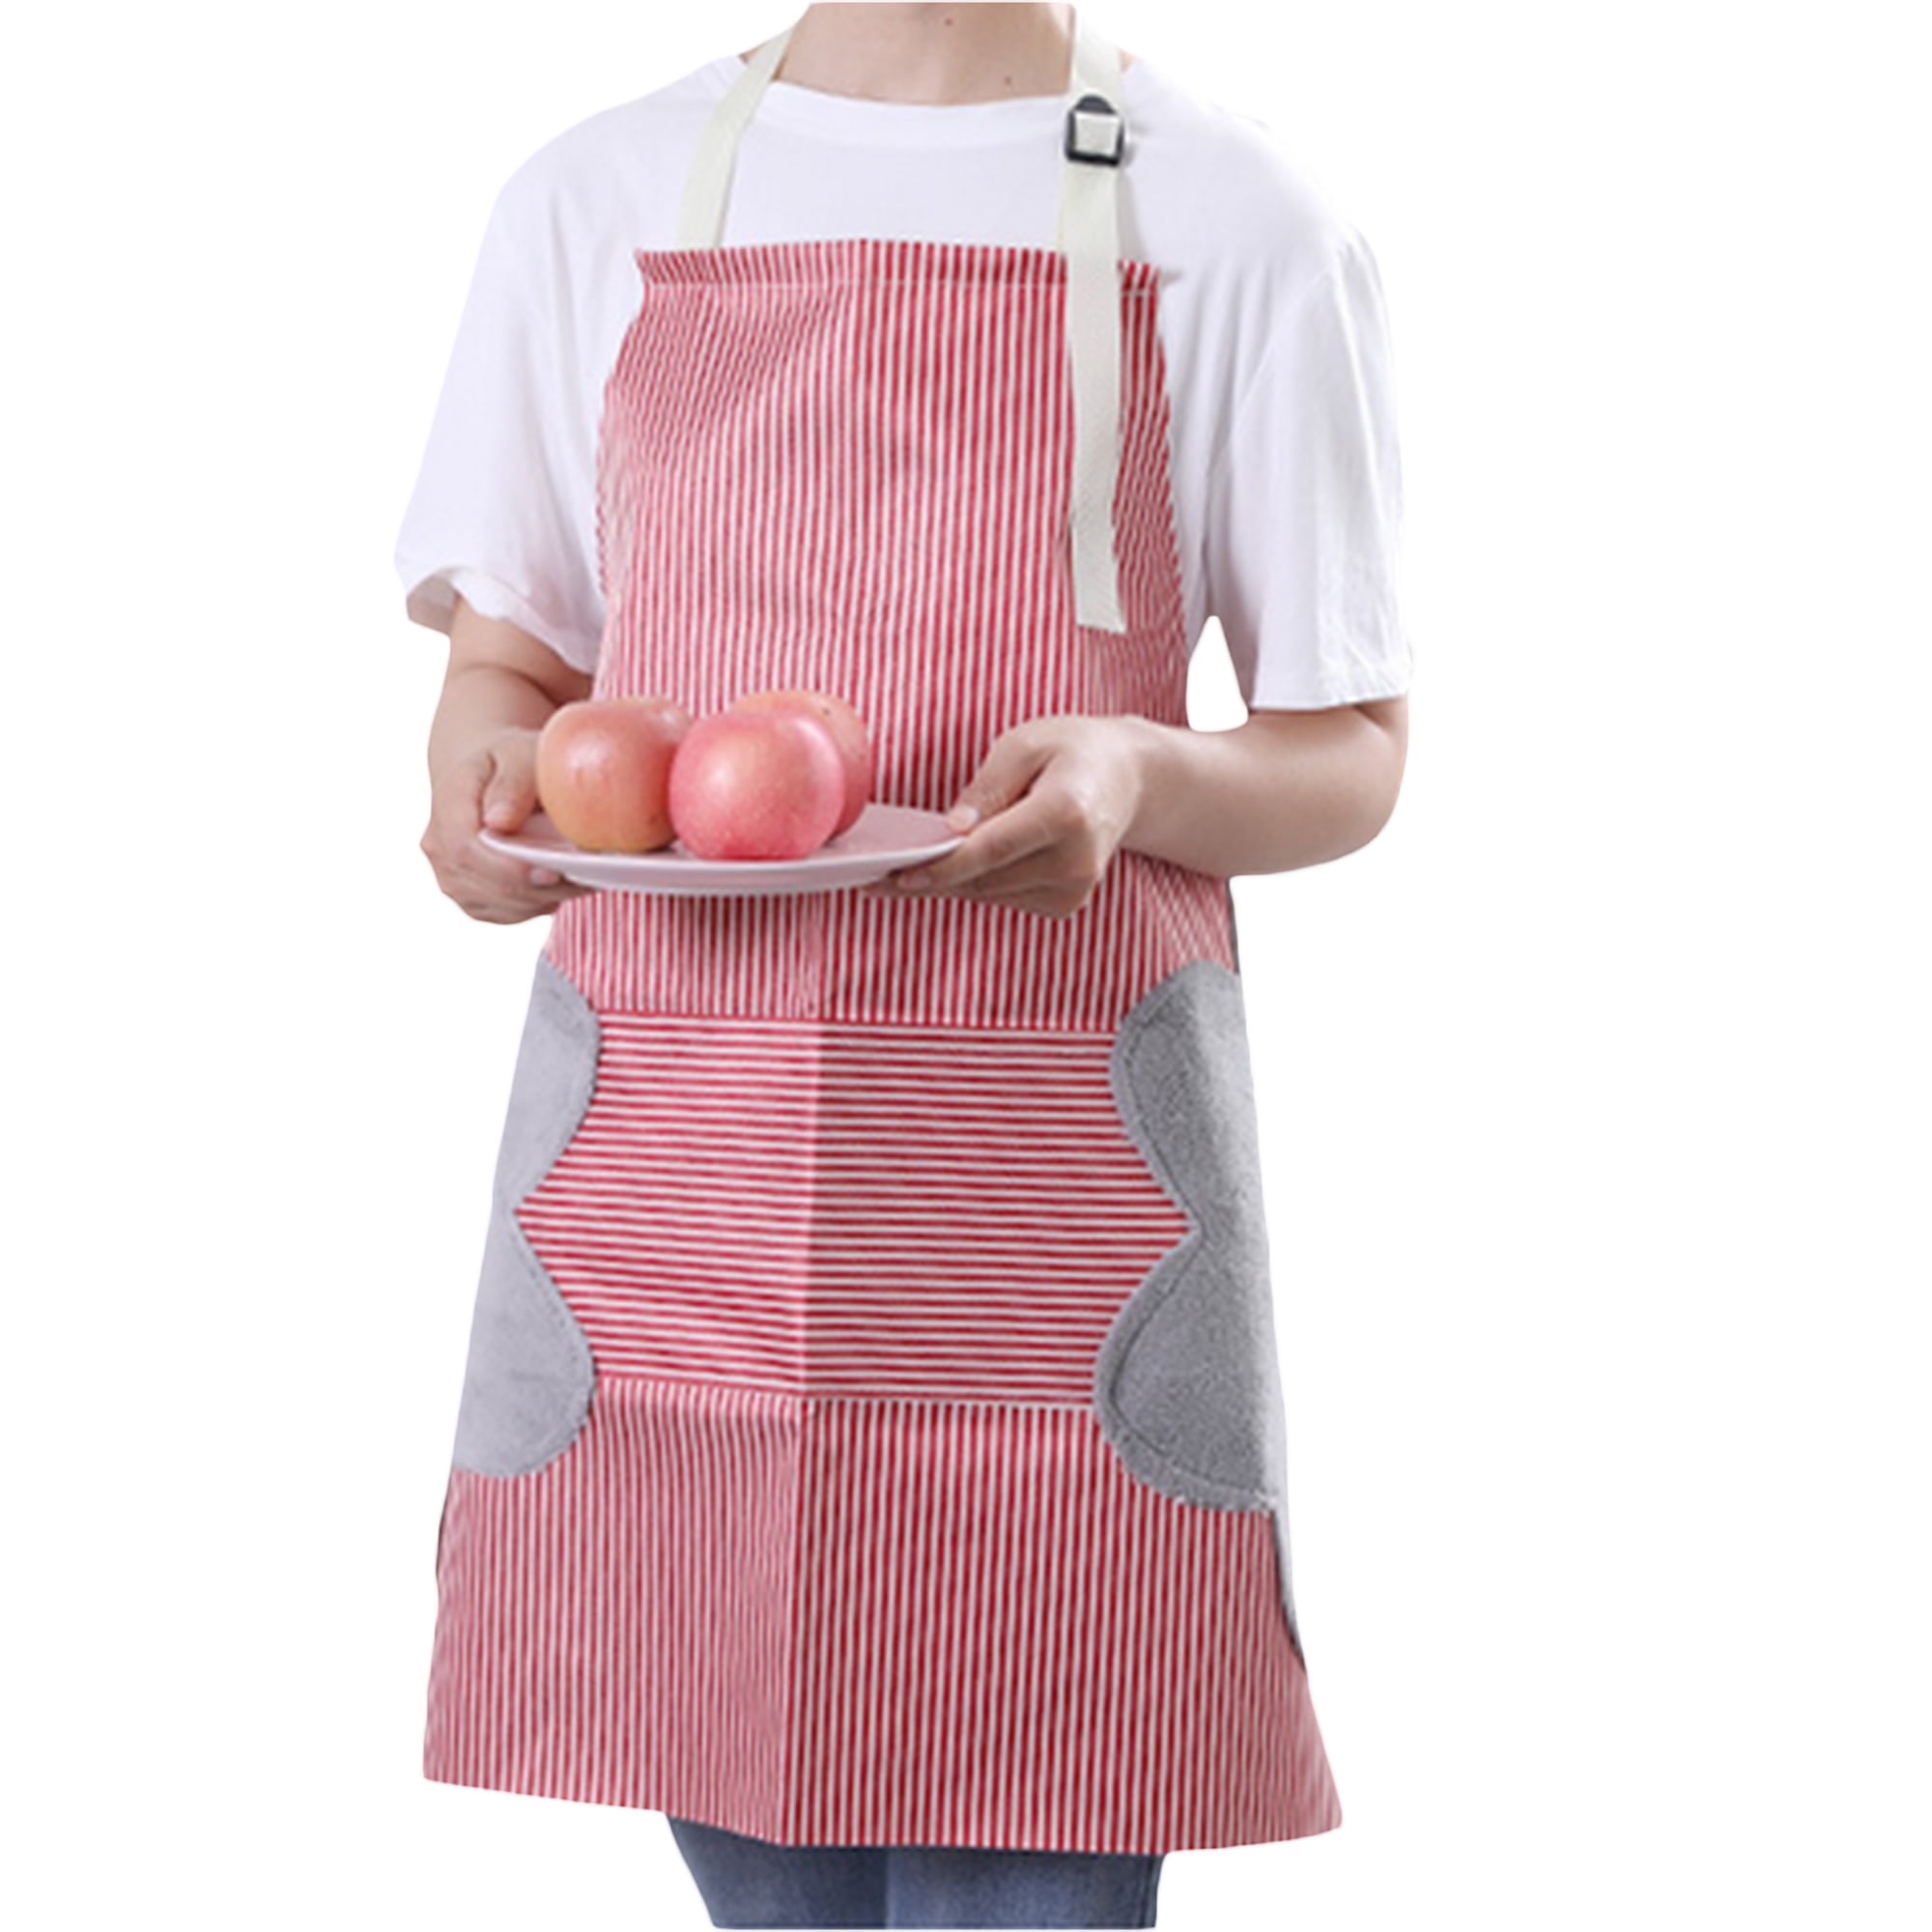 1pc Kitchen Apron With Big Pocket Waterproof Apron For Cooking